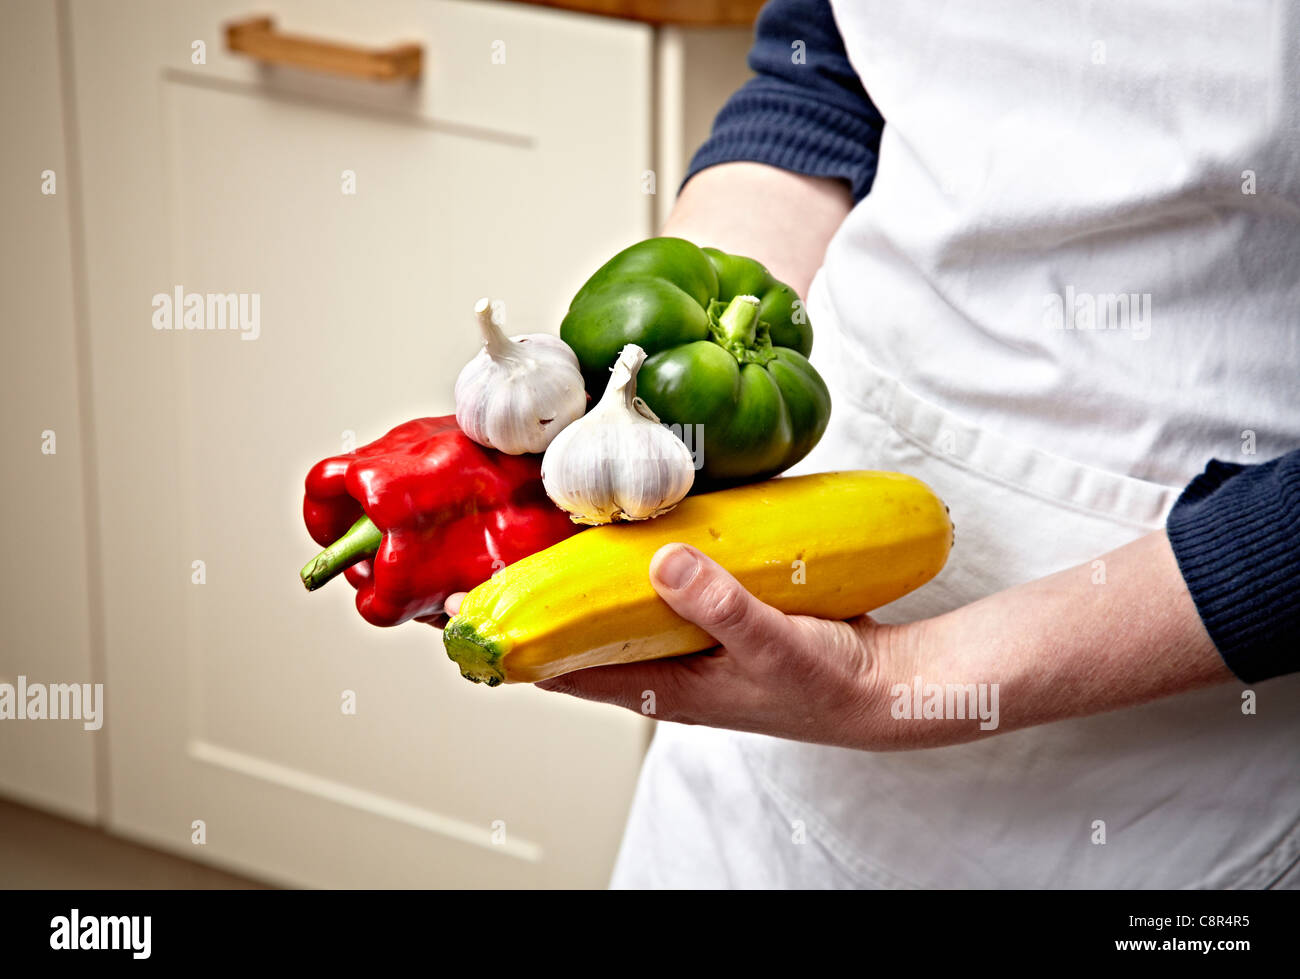 Chef holding various vegetables in hands in modern kitchen setting. Chef is wearing white apron. Stock Photo